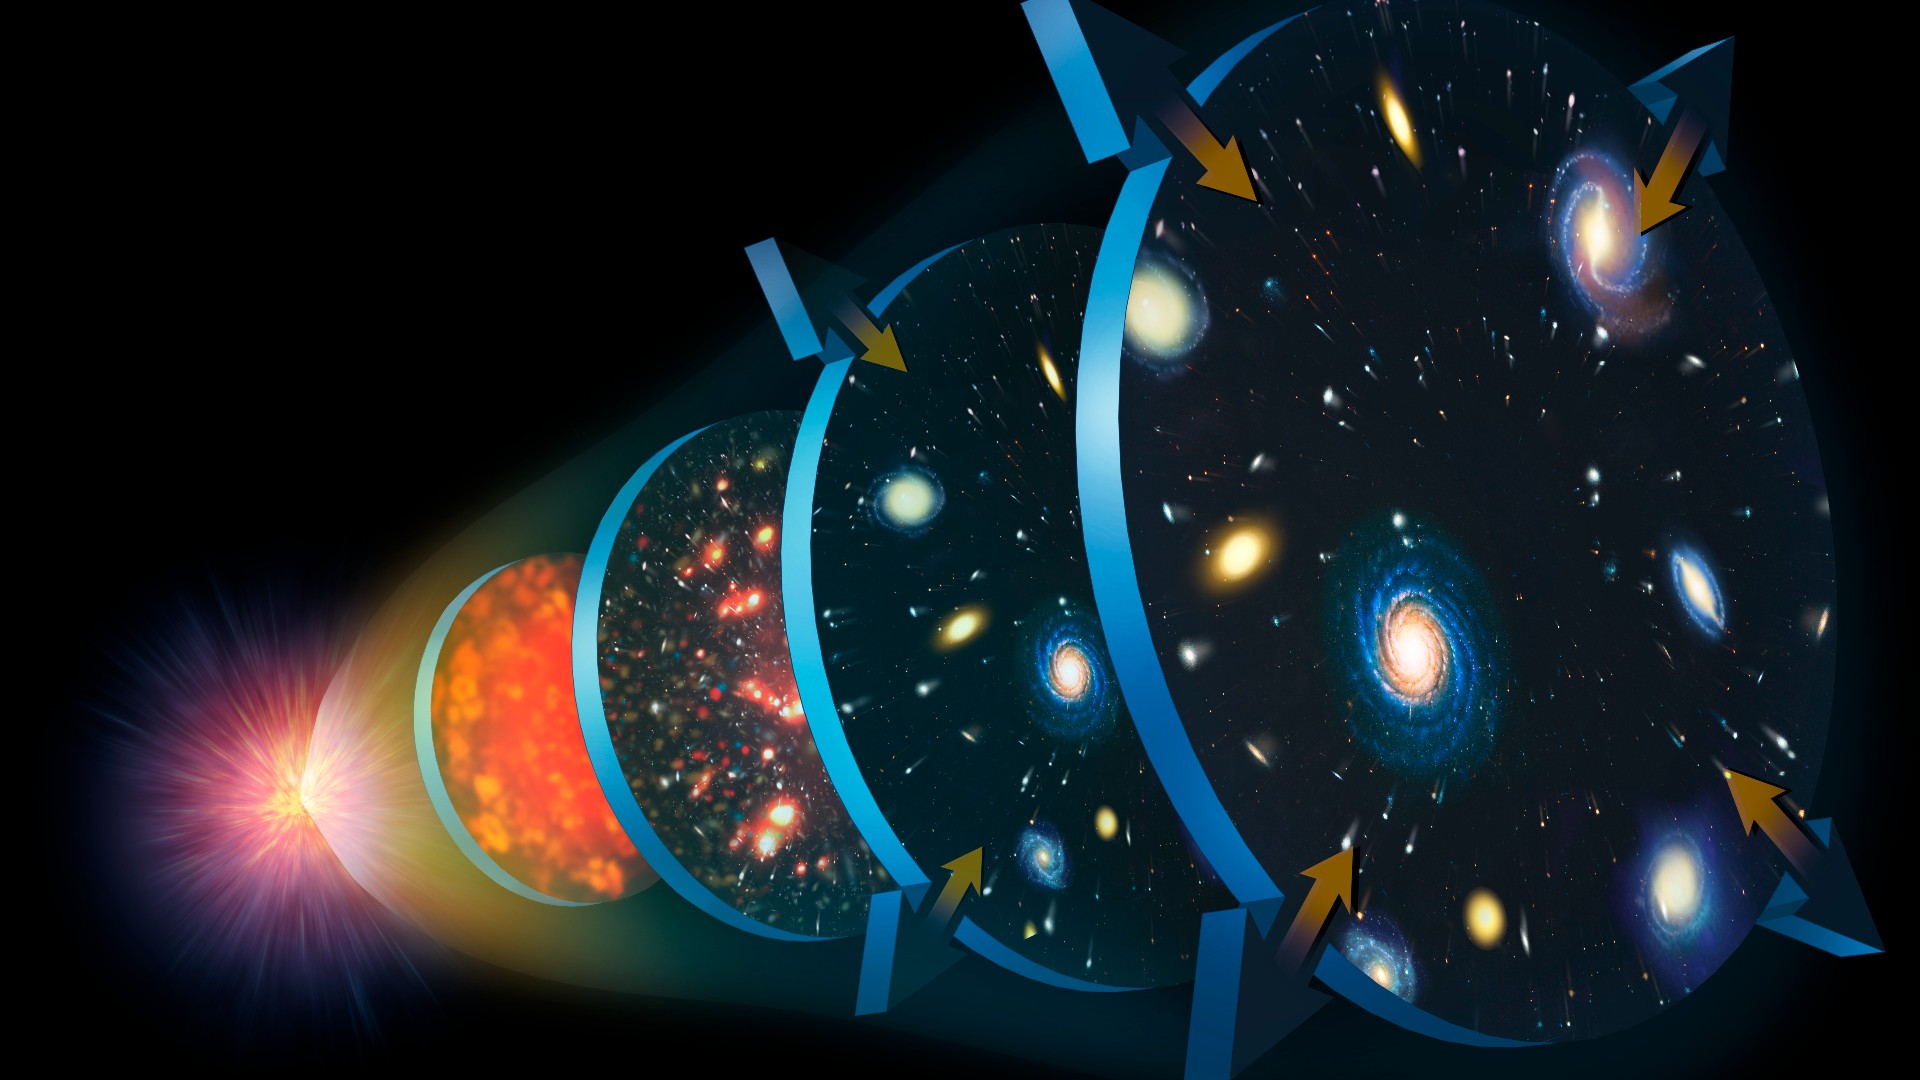 Illustration of the expansion of the universe.